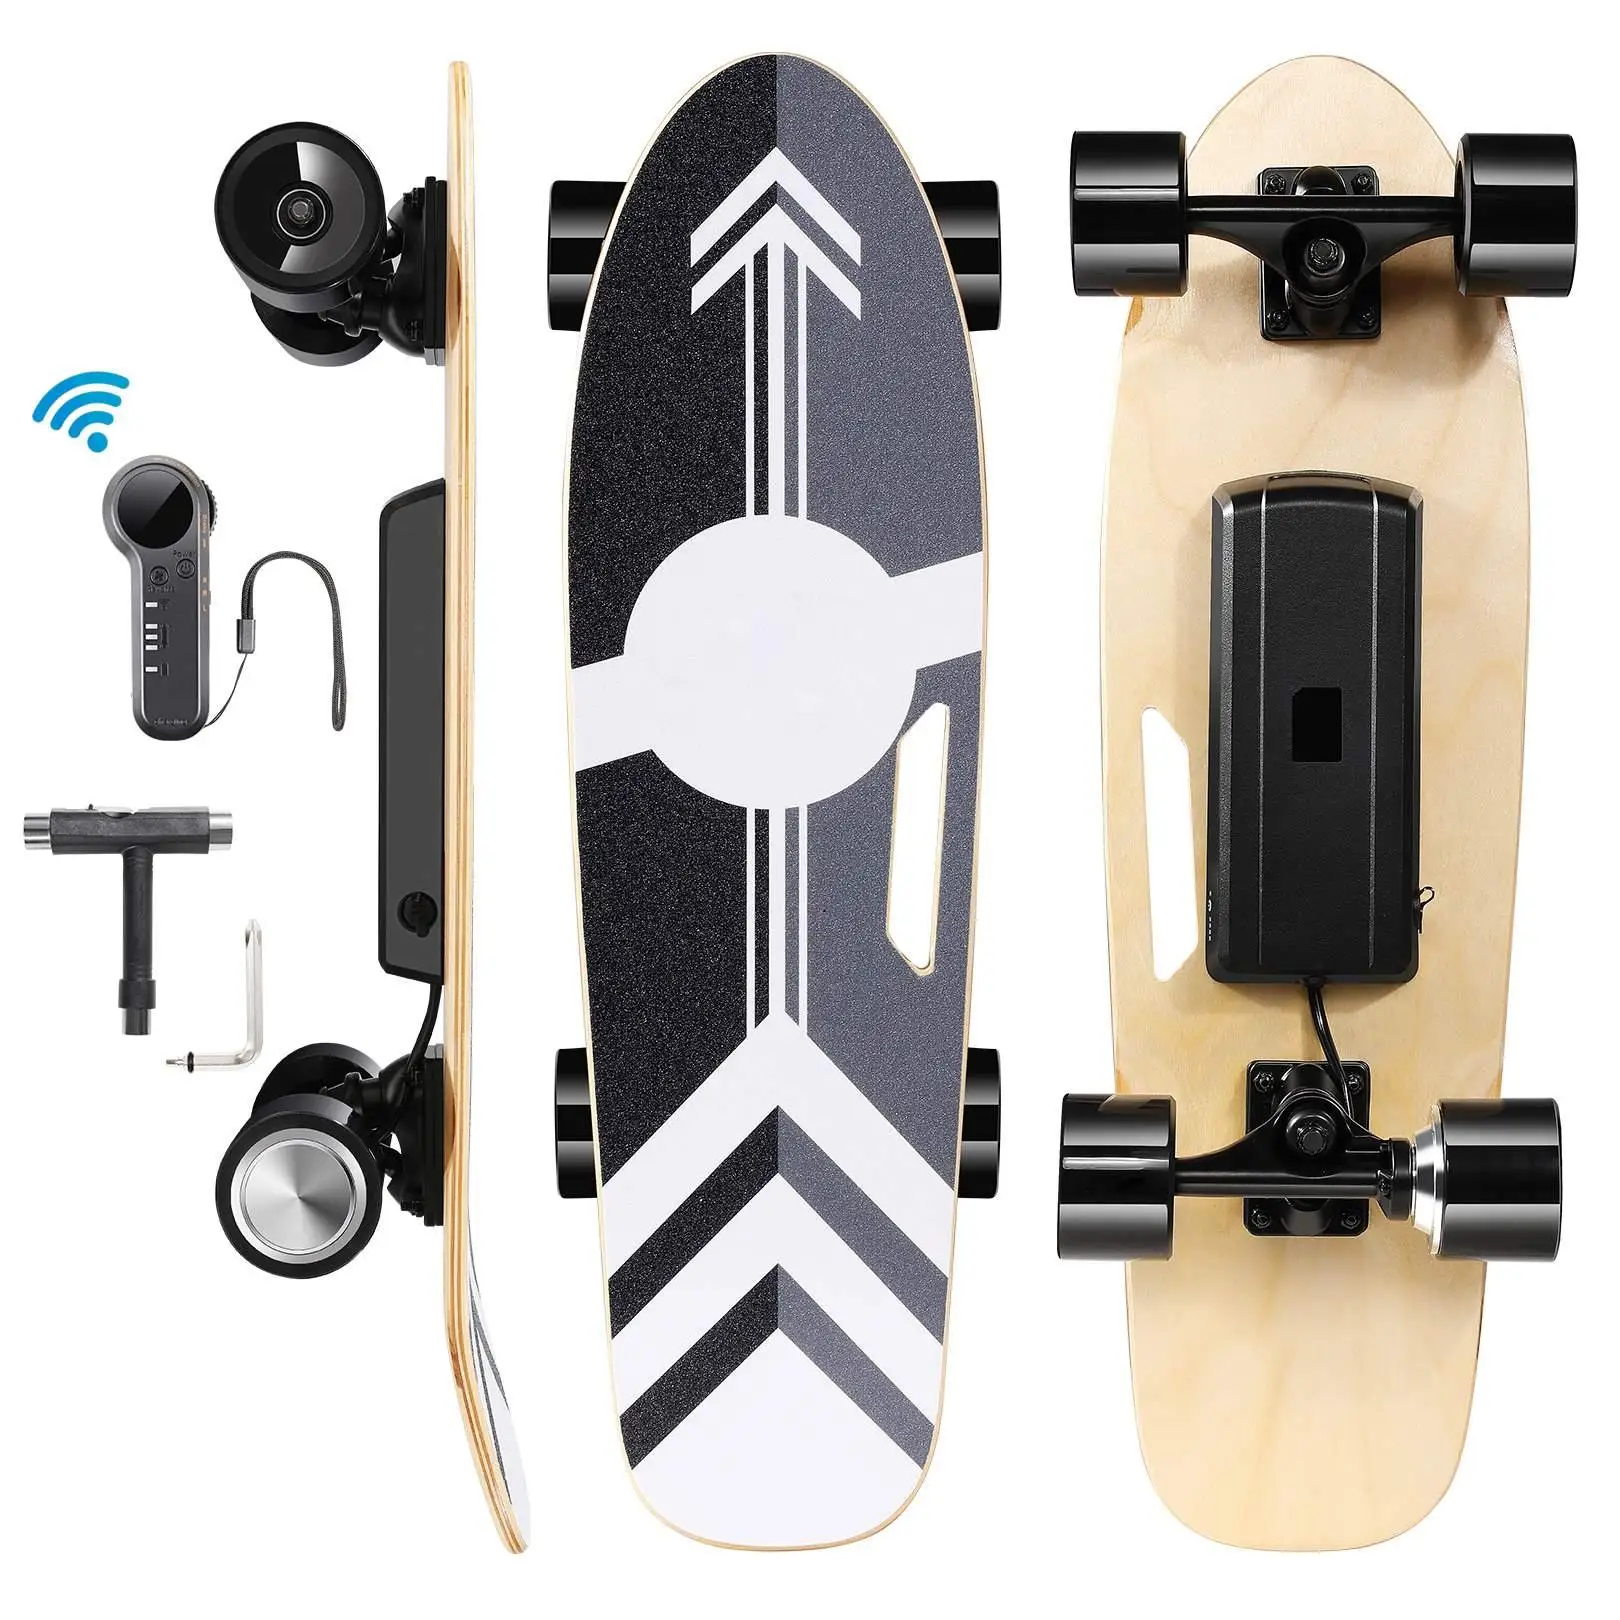 27.5x8.7x5.5inch 3-Speed Electric Skateboard Lithium Battery Powered with Remote Controller 29.4V 2000mah Lithium Battery